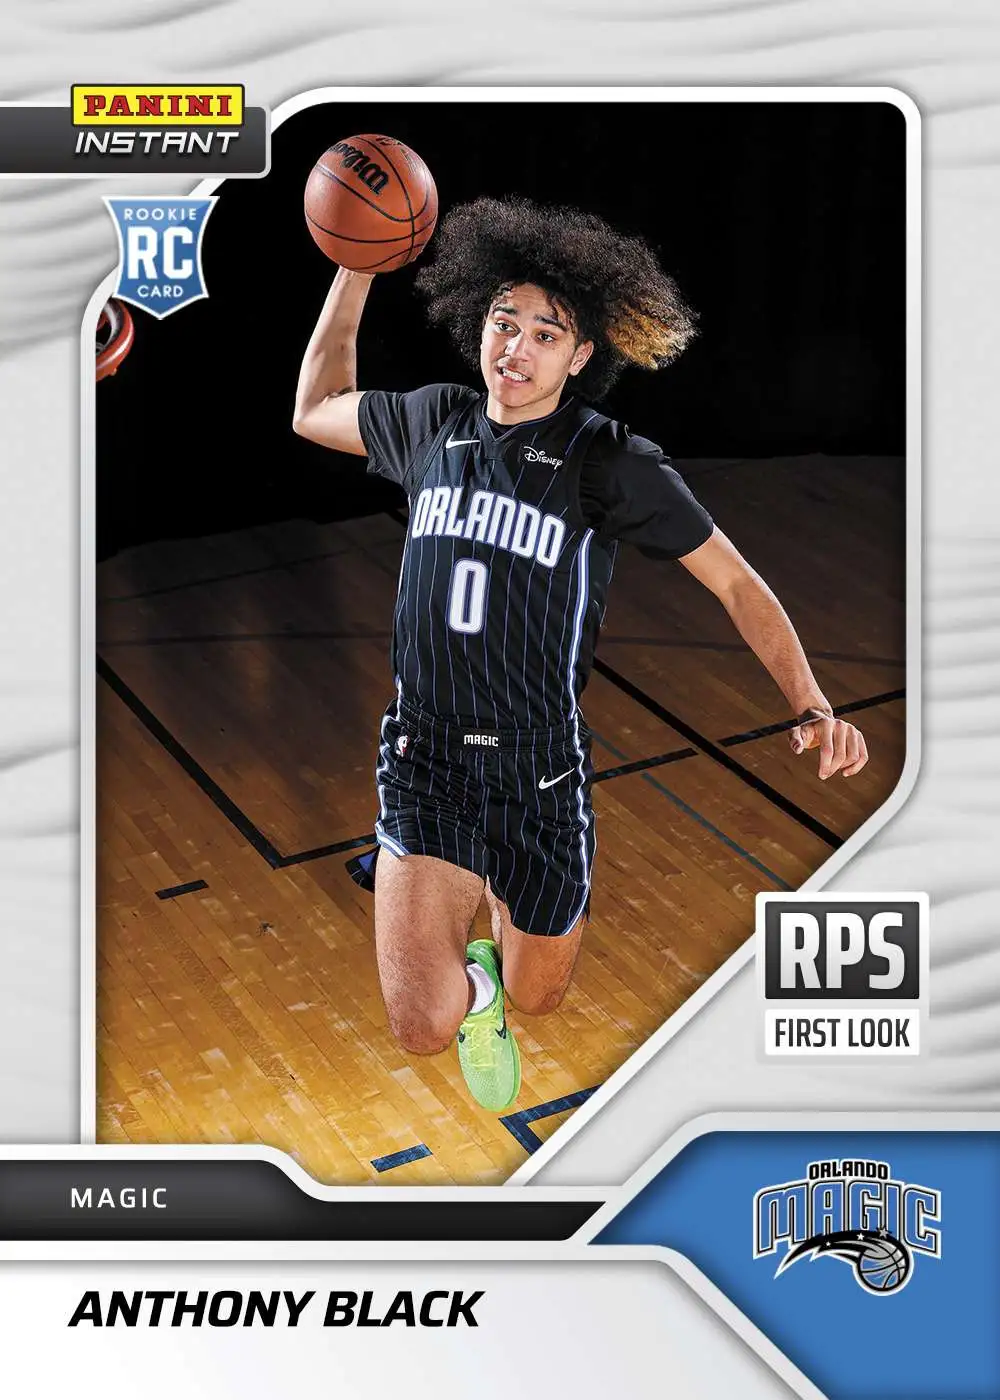 NBA 2023-24 Instant RPS First Look Basketball Single Card Anthony Black  RPS-6 Rookie - ToyWiz